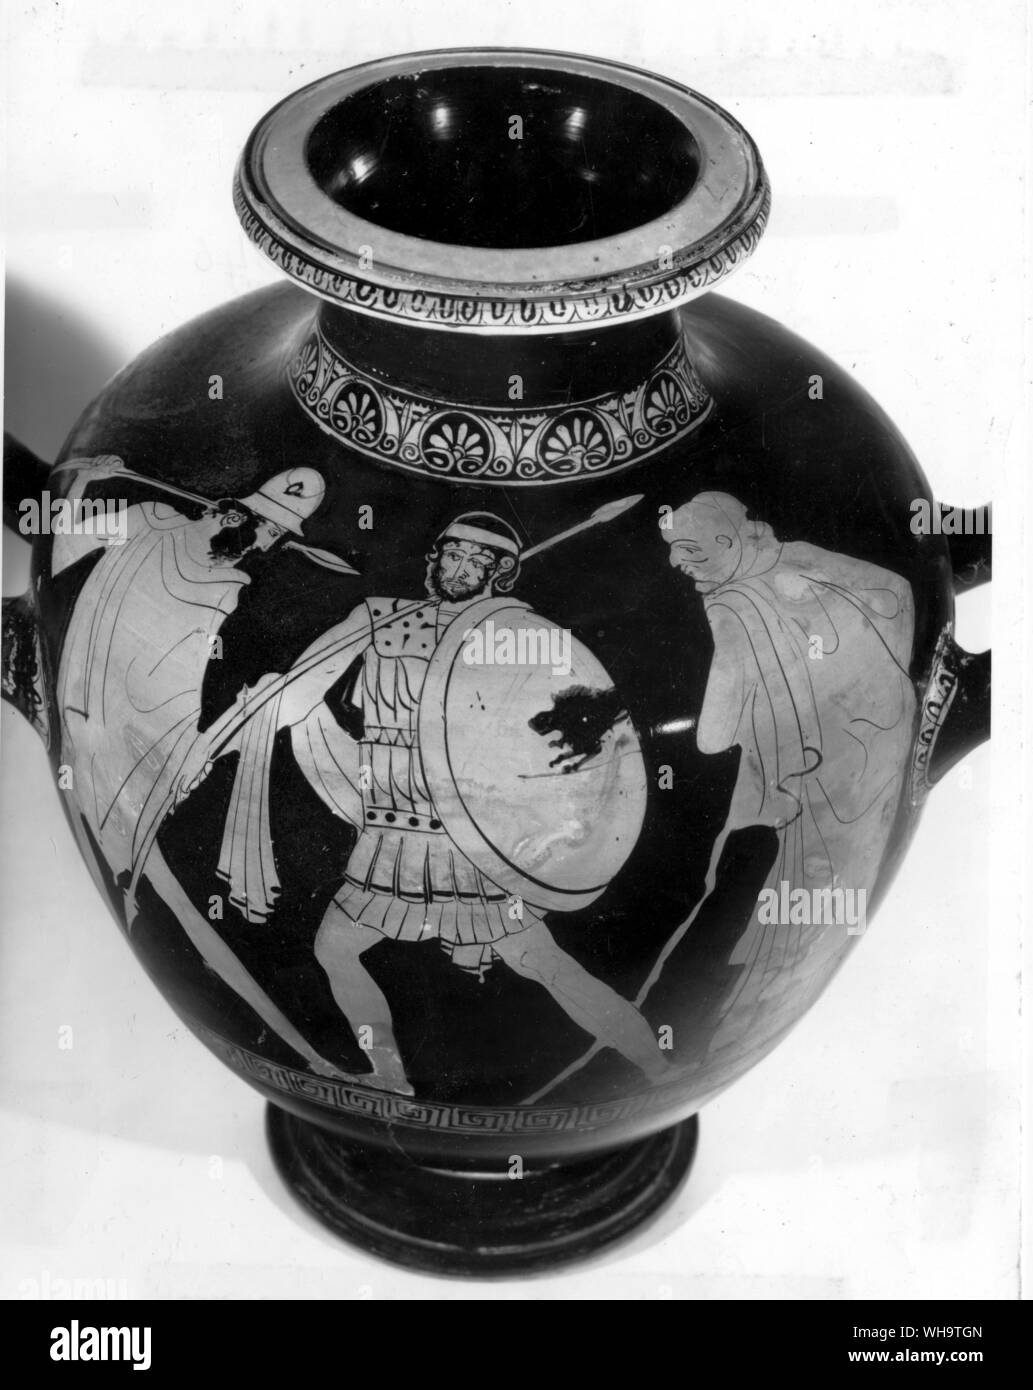 Agamemnon, commander-in-chief of the Greek forces against Troy. He married Clytemnestra, whom Aeschylus makes a formidable figure in contrast to her feeble though blustering lover, Aegisthus; so that when they conspired to murder Agamemnon, the responsibility was hers. Stock Photo